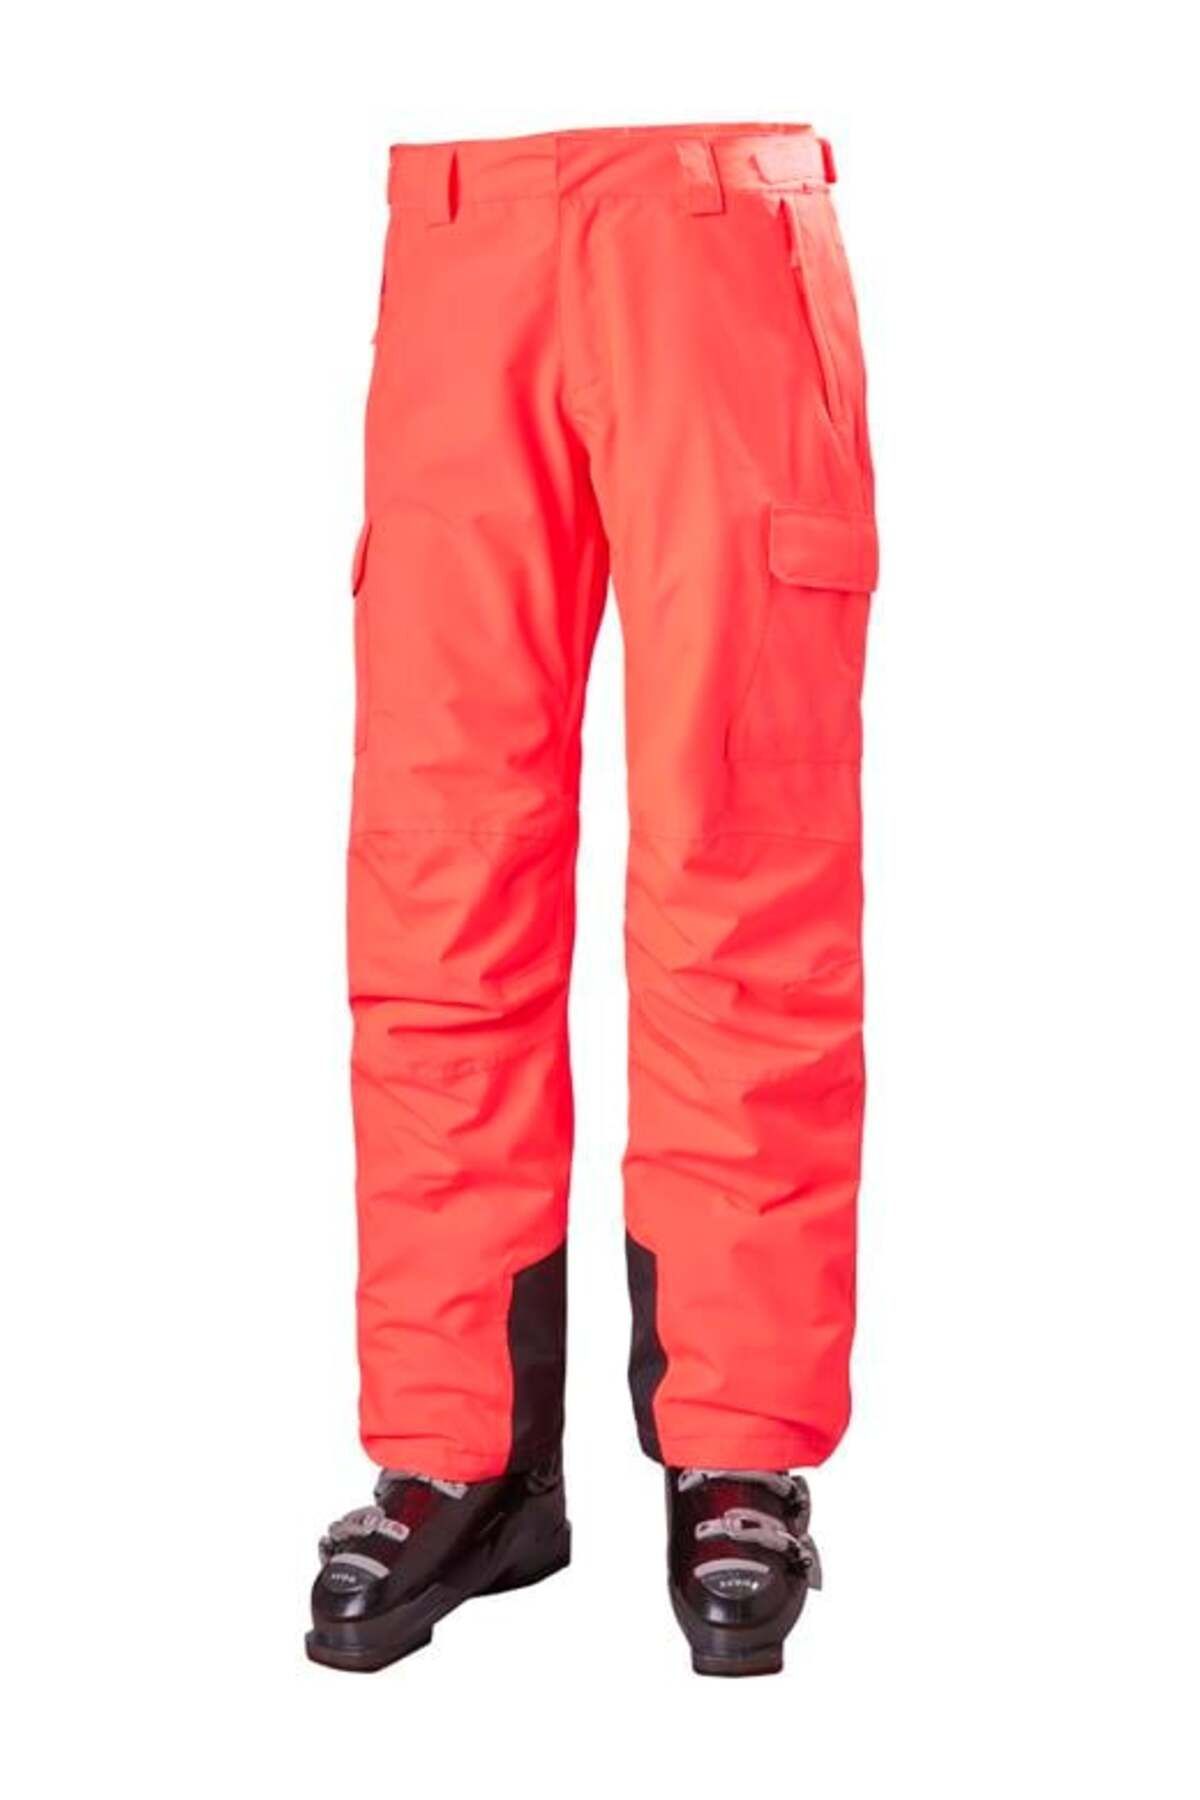 Helly Hansen Hh W Swıtch Cargo Insulated Pant